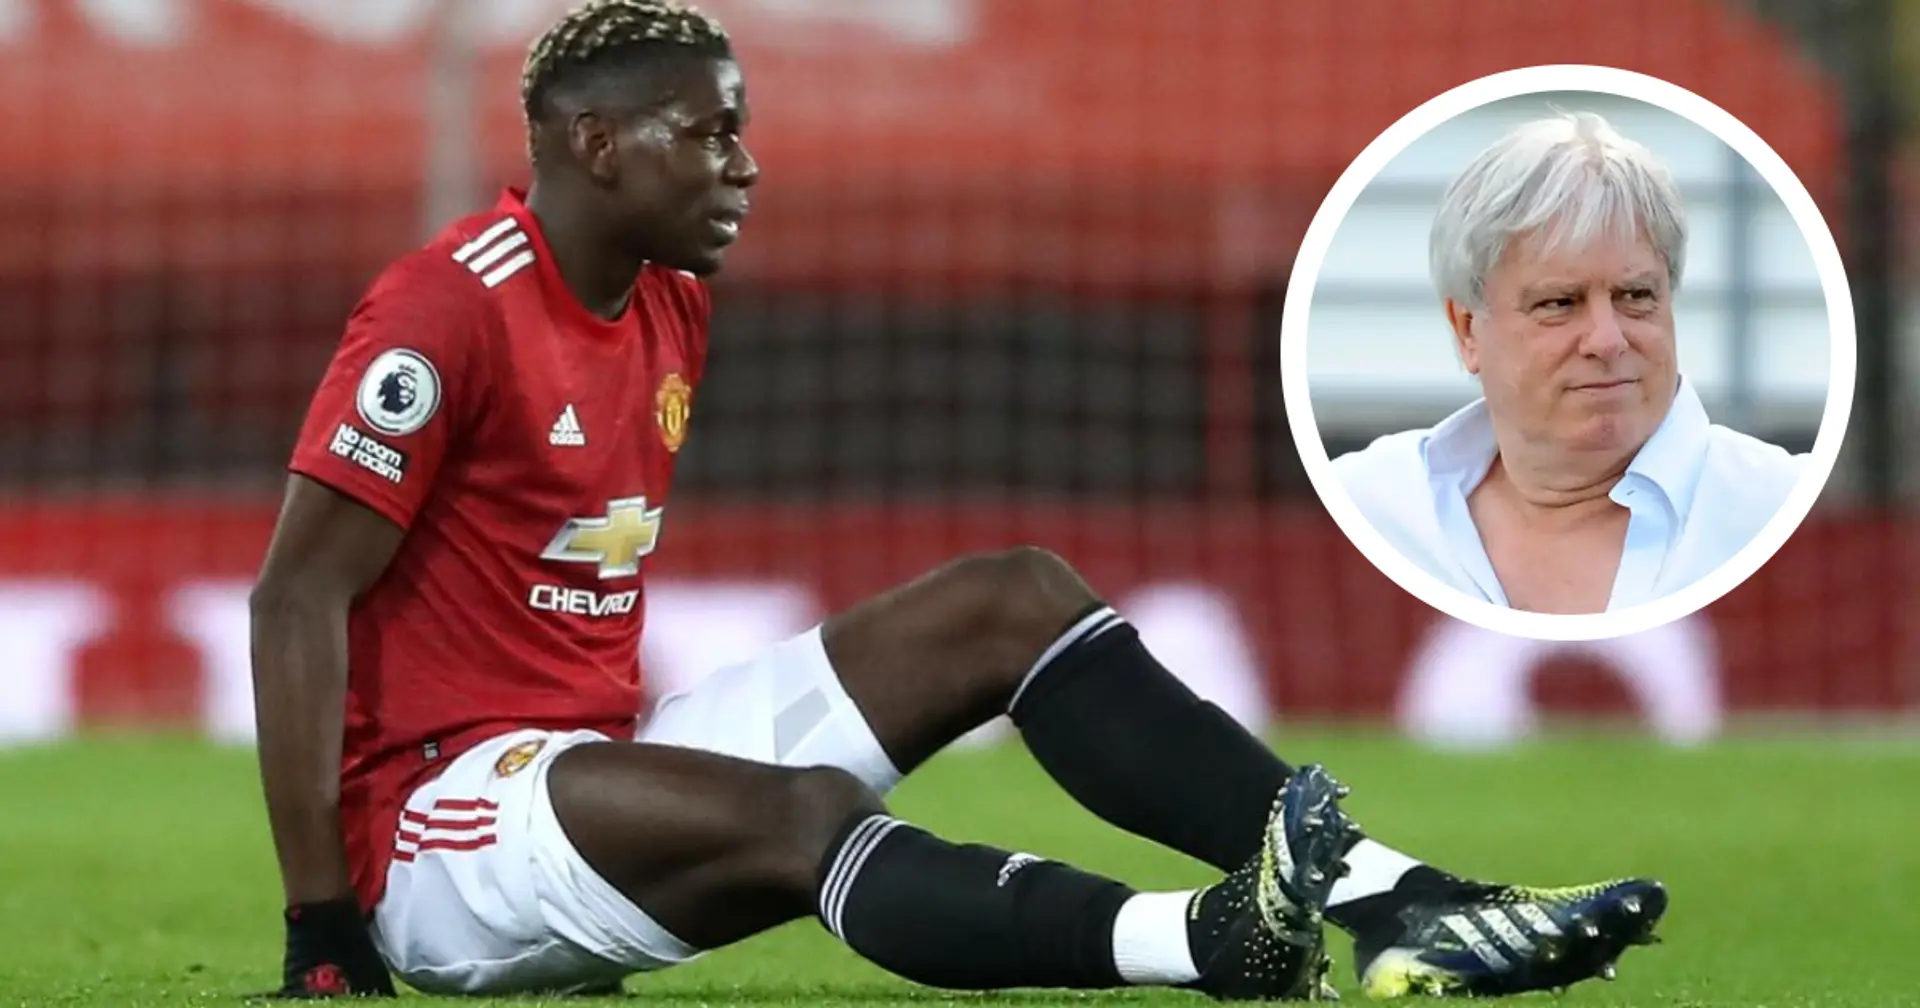 'They gave away Pogba so easily, they must have known something: ex-Juventus boss accuses Man United of hiding Paul's injury